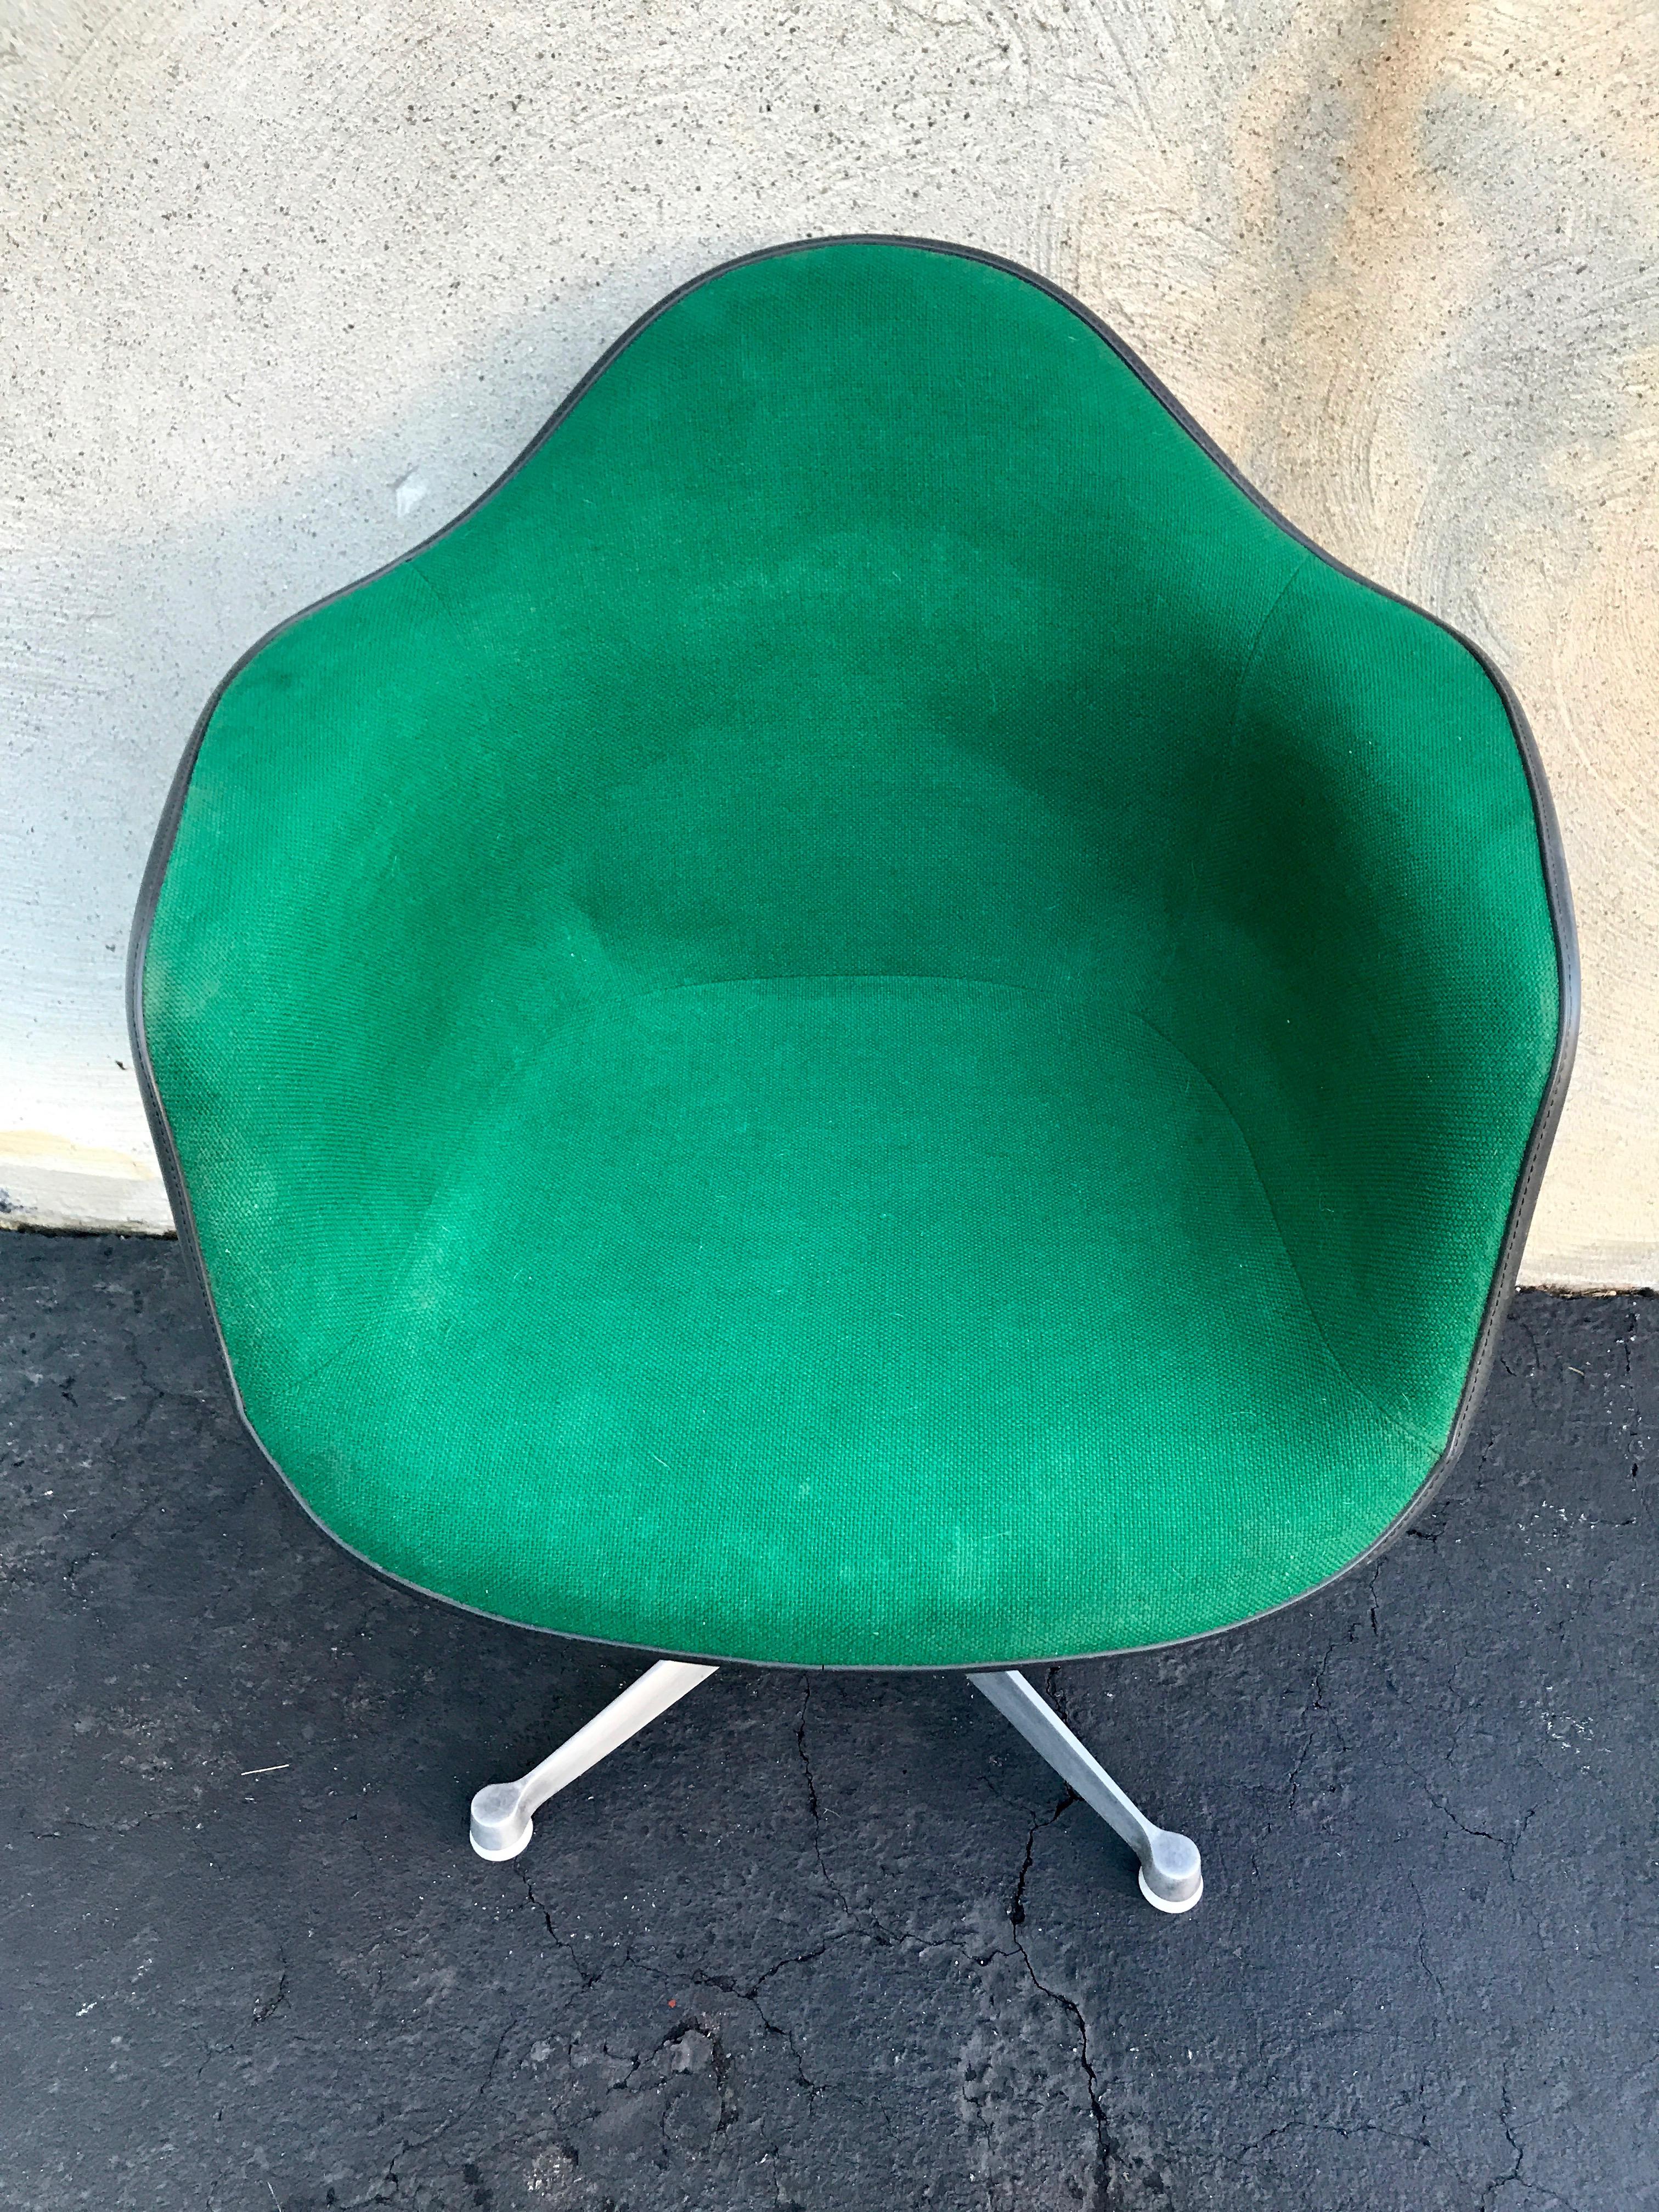 Eames Herman Miller shell chair with rare green fabric and swivel base. Has a few scratches on the back from someone swiveling it into the wall, but overall good condition. Has original stickers still on the bottom. 31